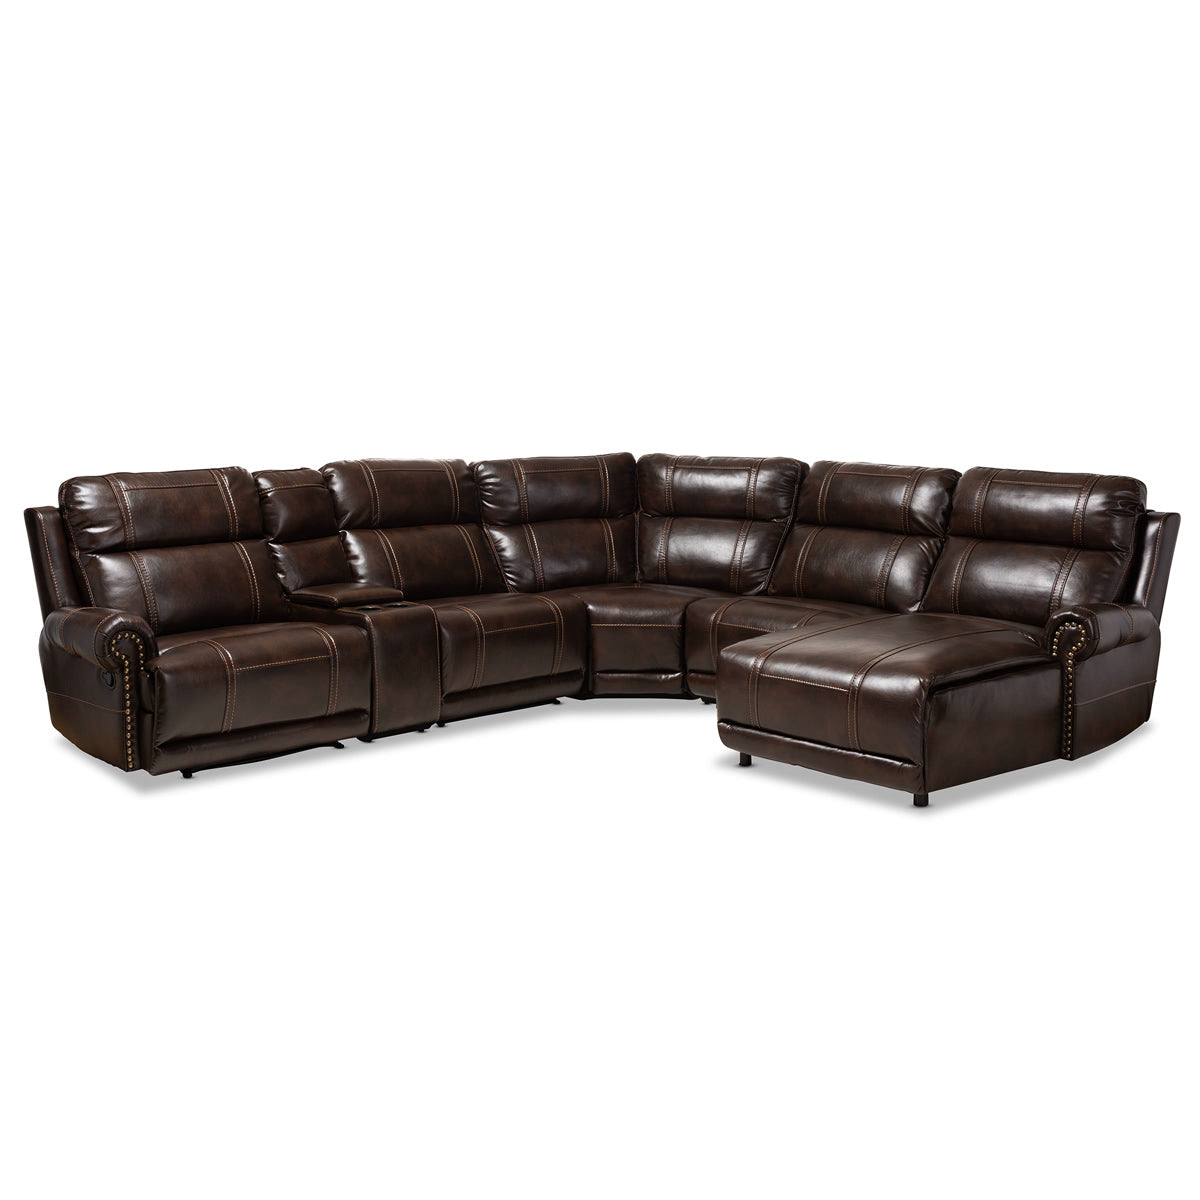 Baxton Studio Dacio Modern and Contemporary Brown Faux Leather Upholstered 6-Piece Sectional Recliner Sofa with 2 Reclining Seats Baxton Studio-sofas-Minimal And Modern - 1